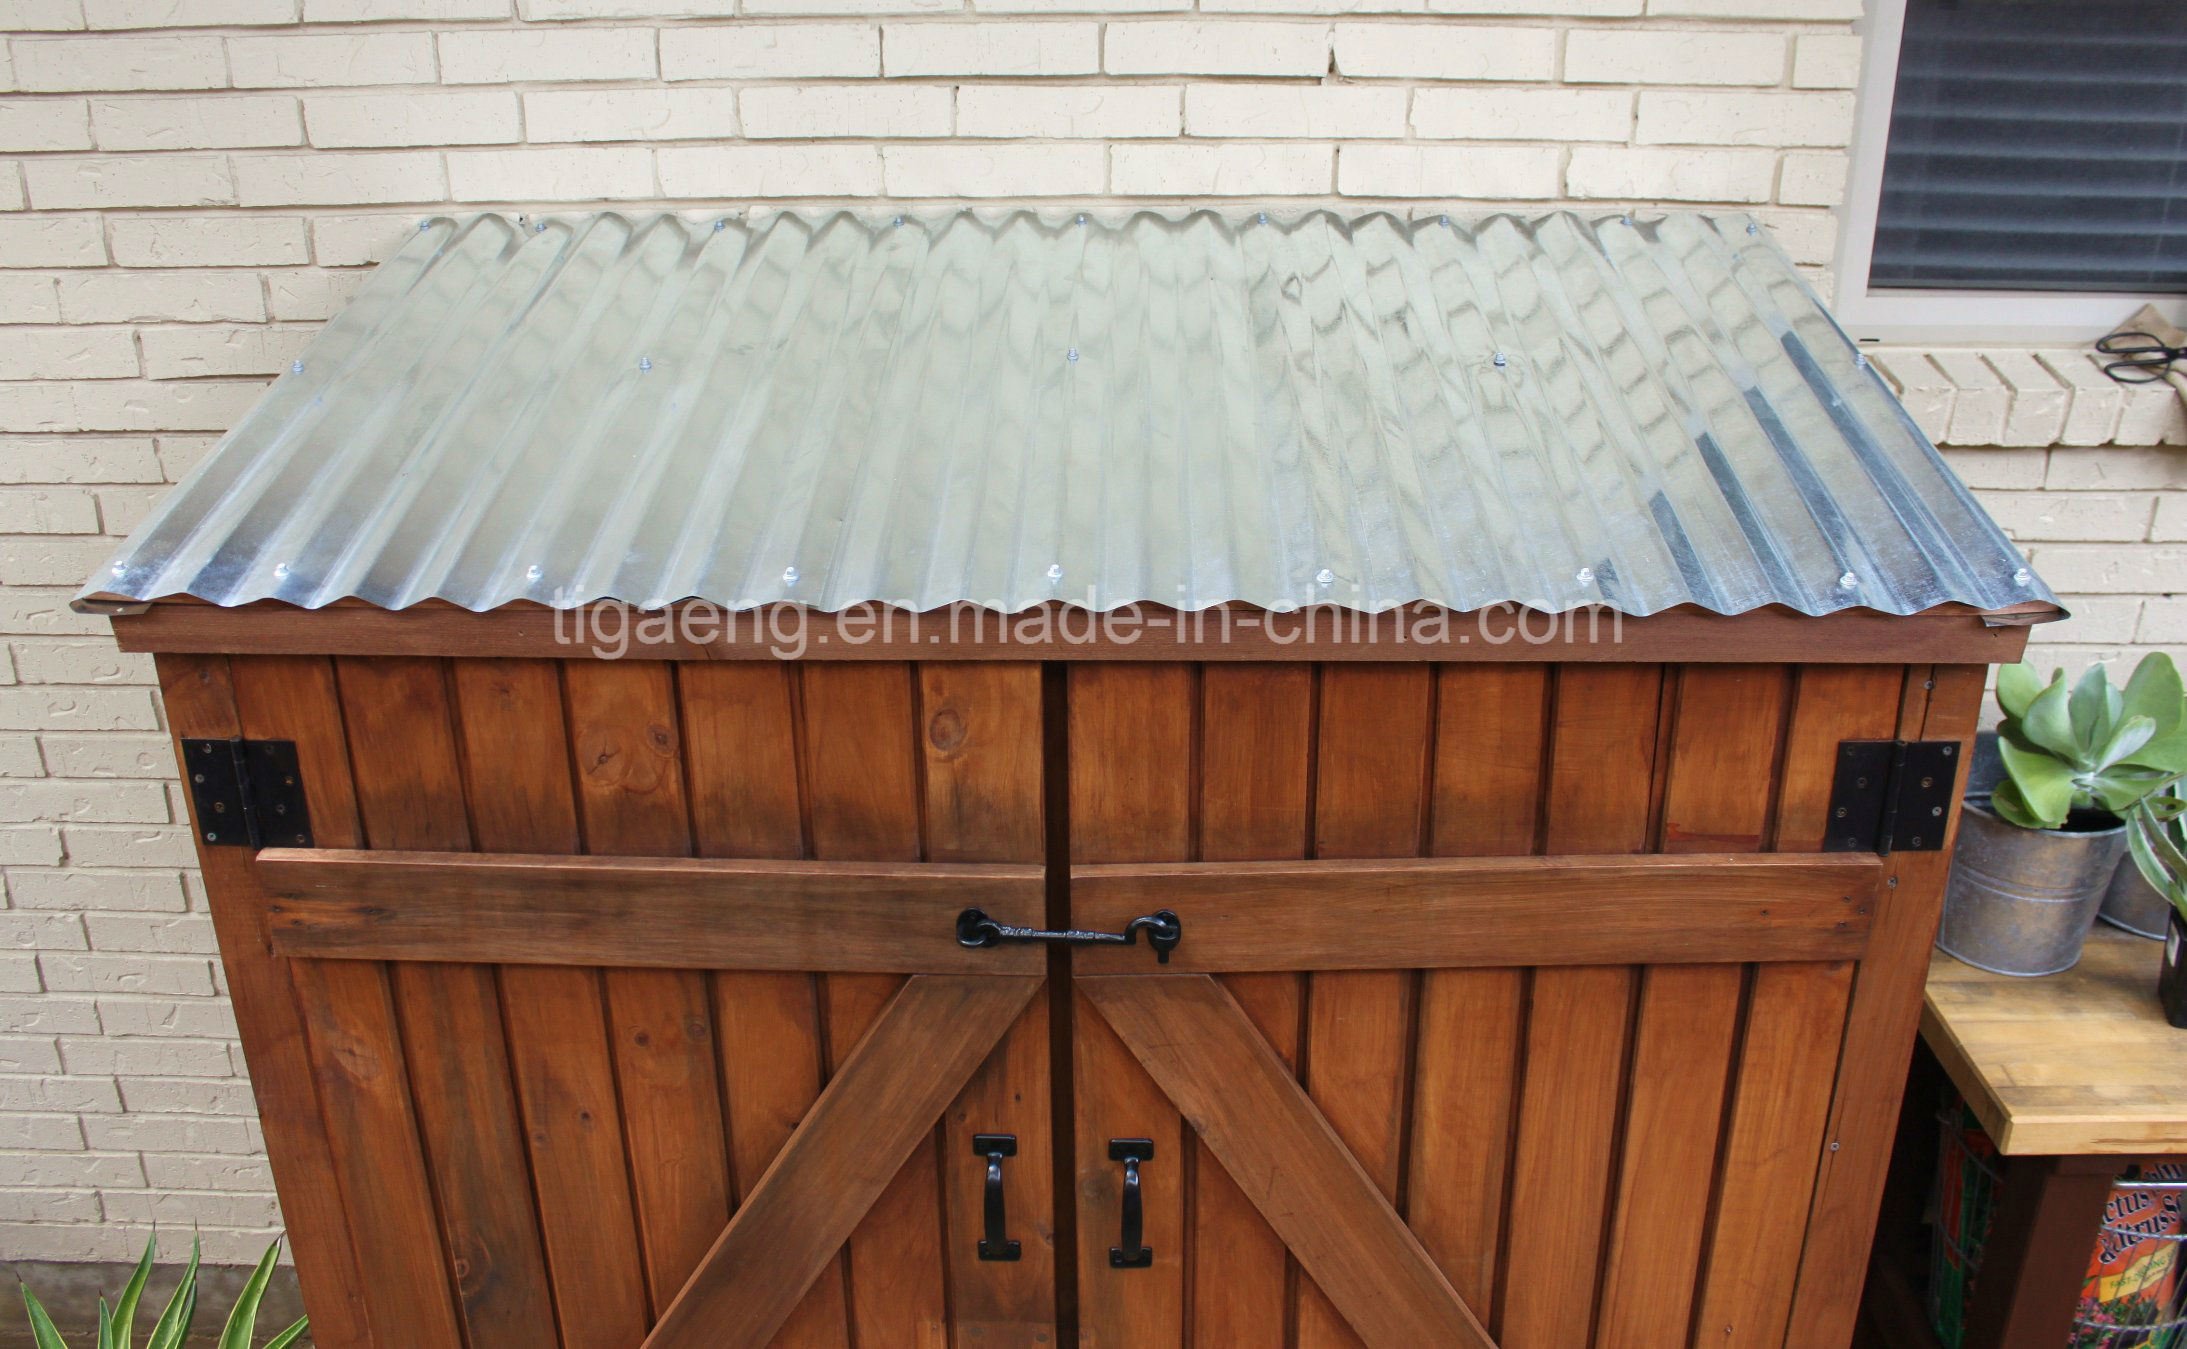 Corrugated Galvanized Steel Sheets Zinc Coated Roofing Tile For Sale